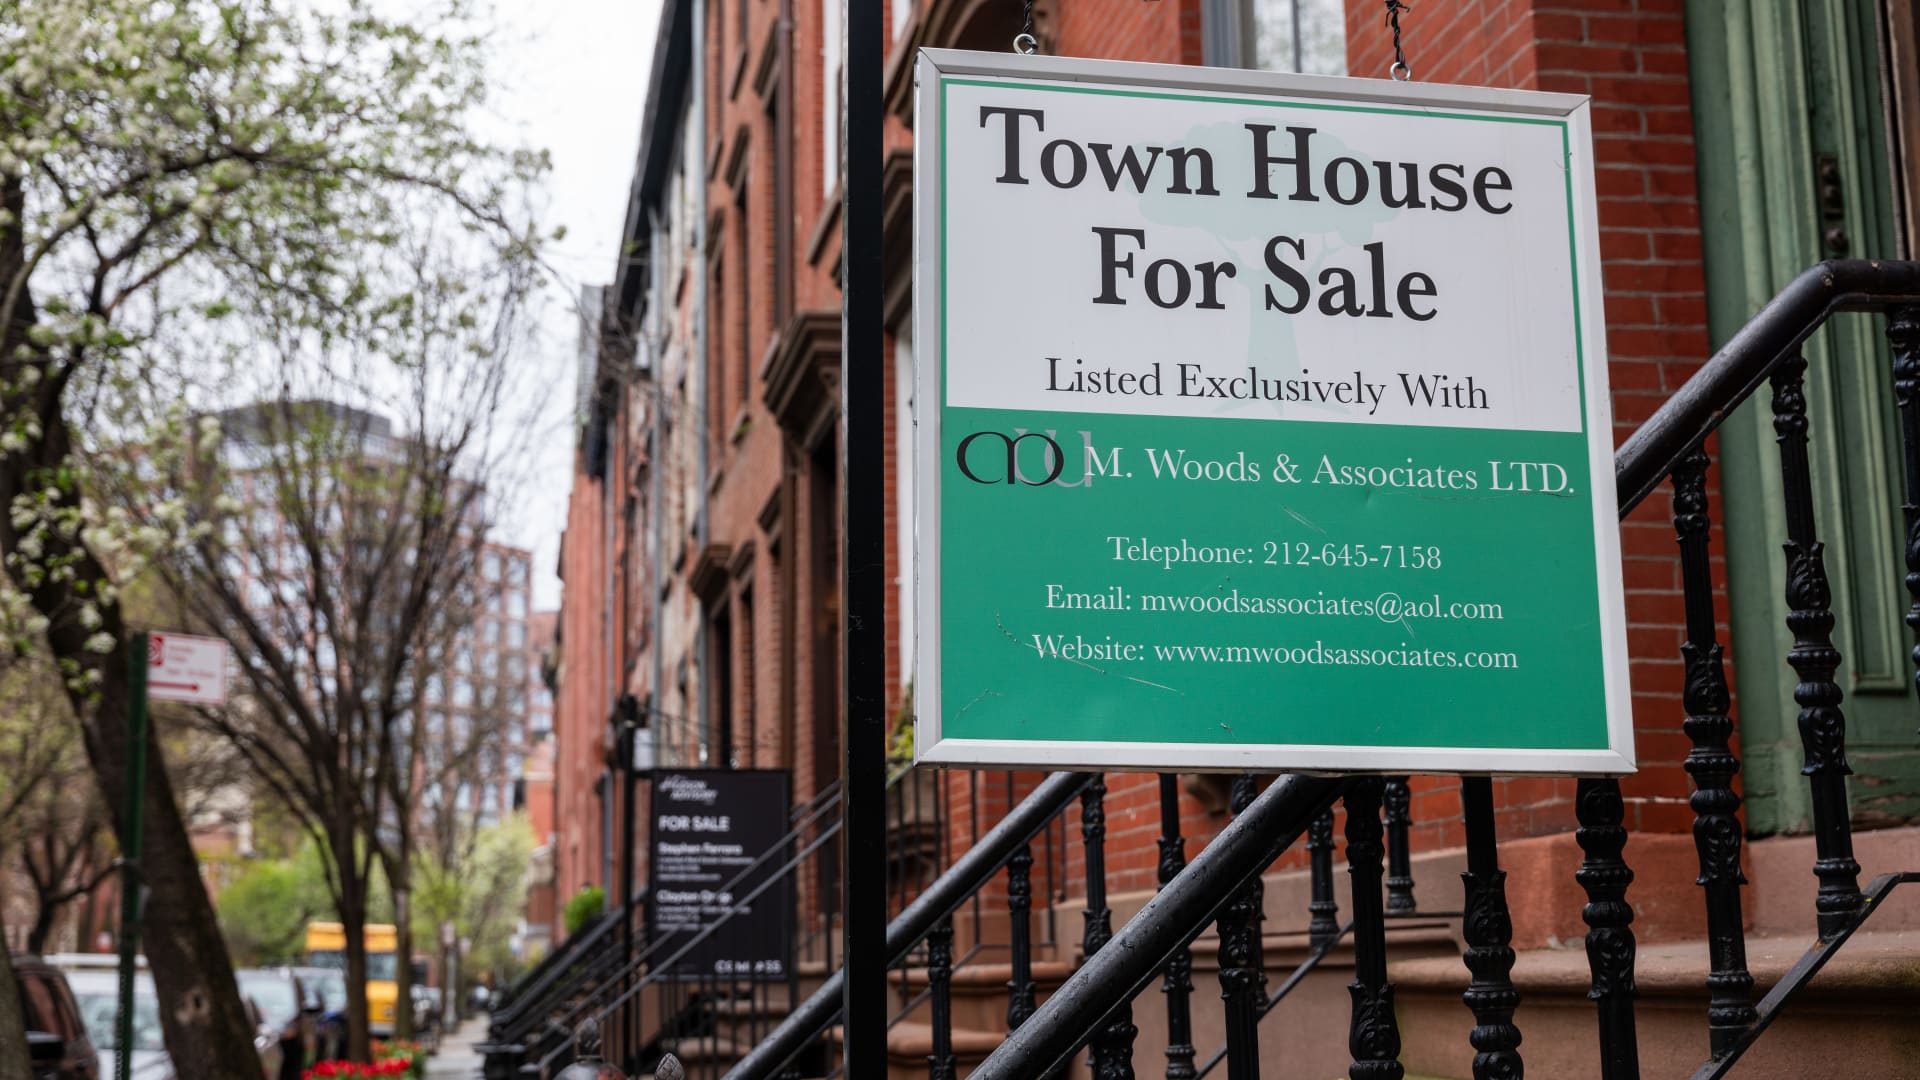 renters’-hopes-of-being-able-to-buy-a-home-have-fallen-to-a-record-low,-new-york-fed-survey-shows